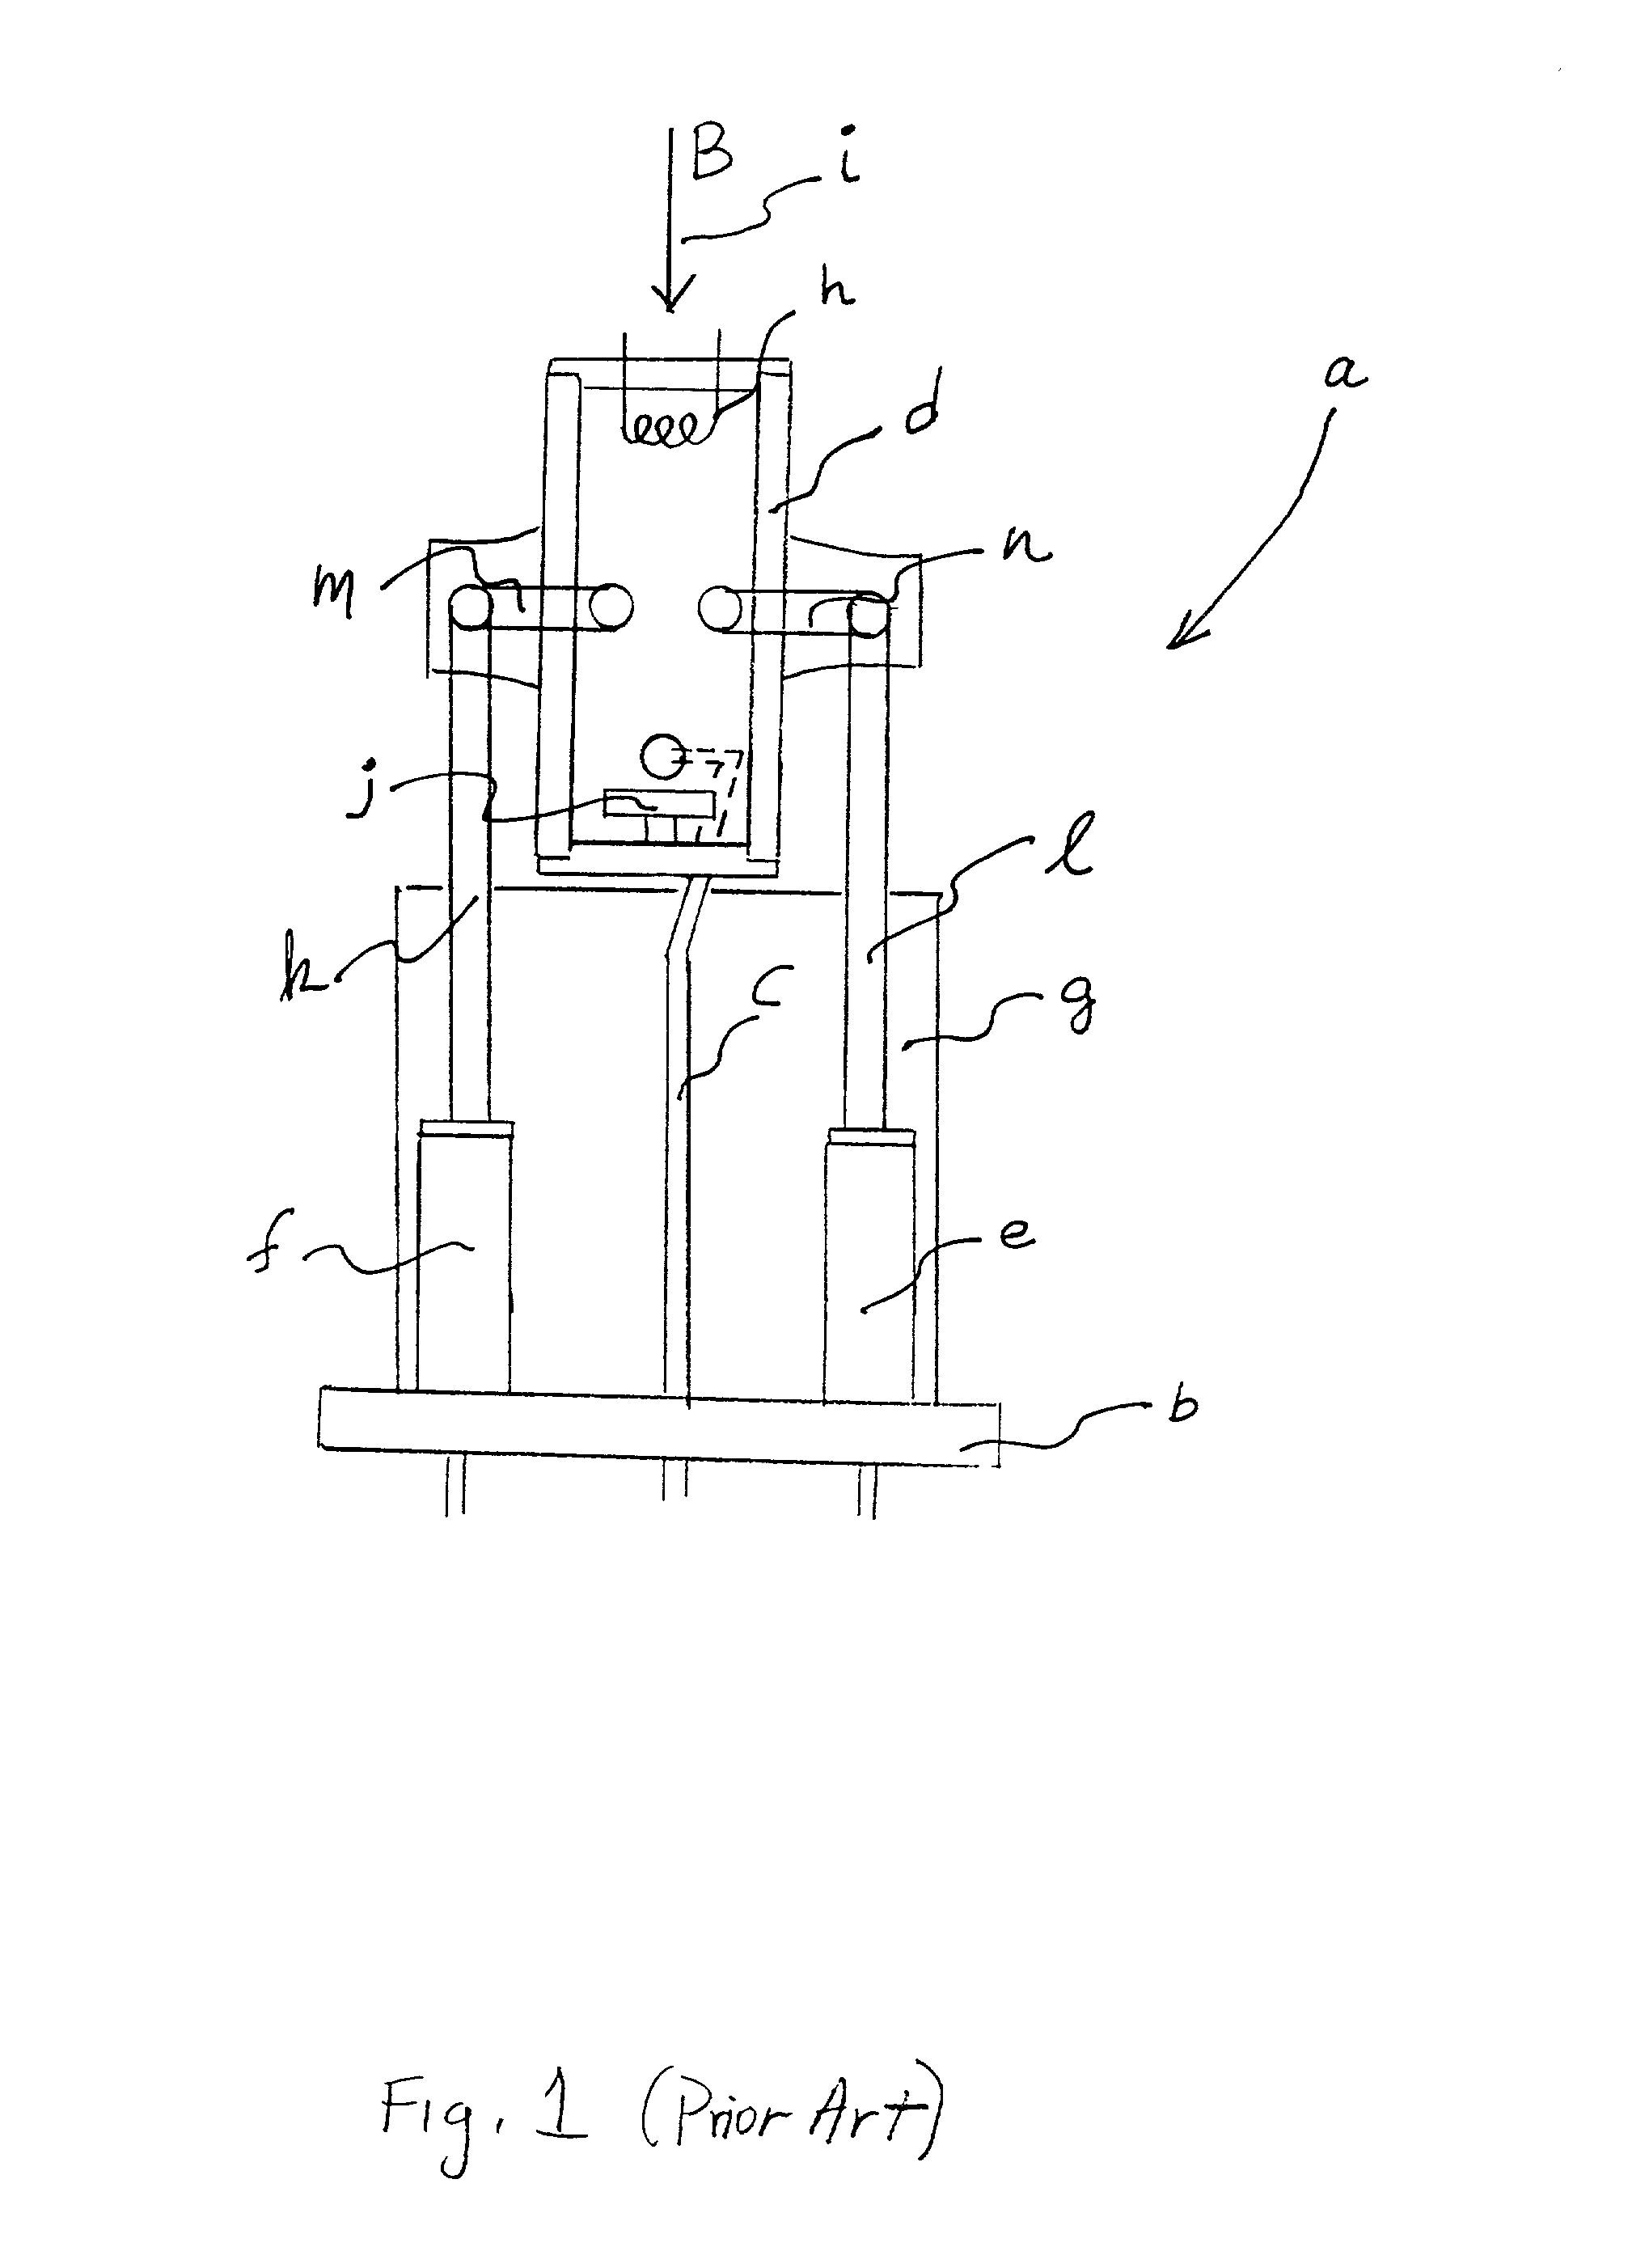 Electron beam ion source with integral low-temperature vaporizer